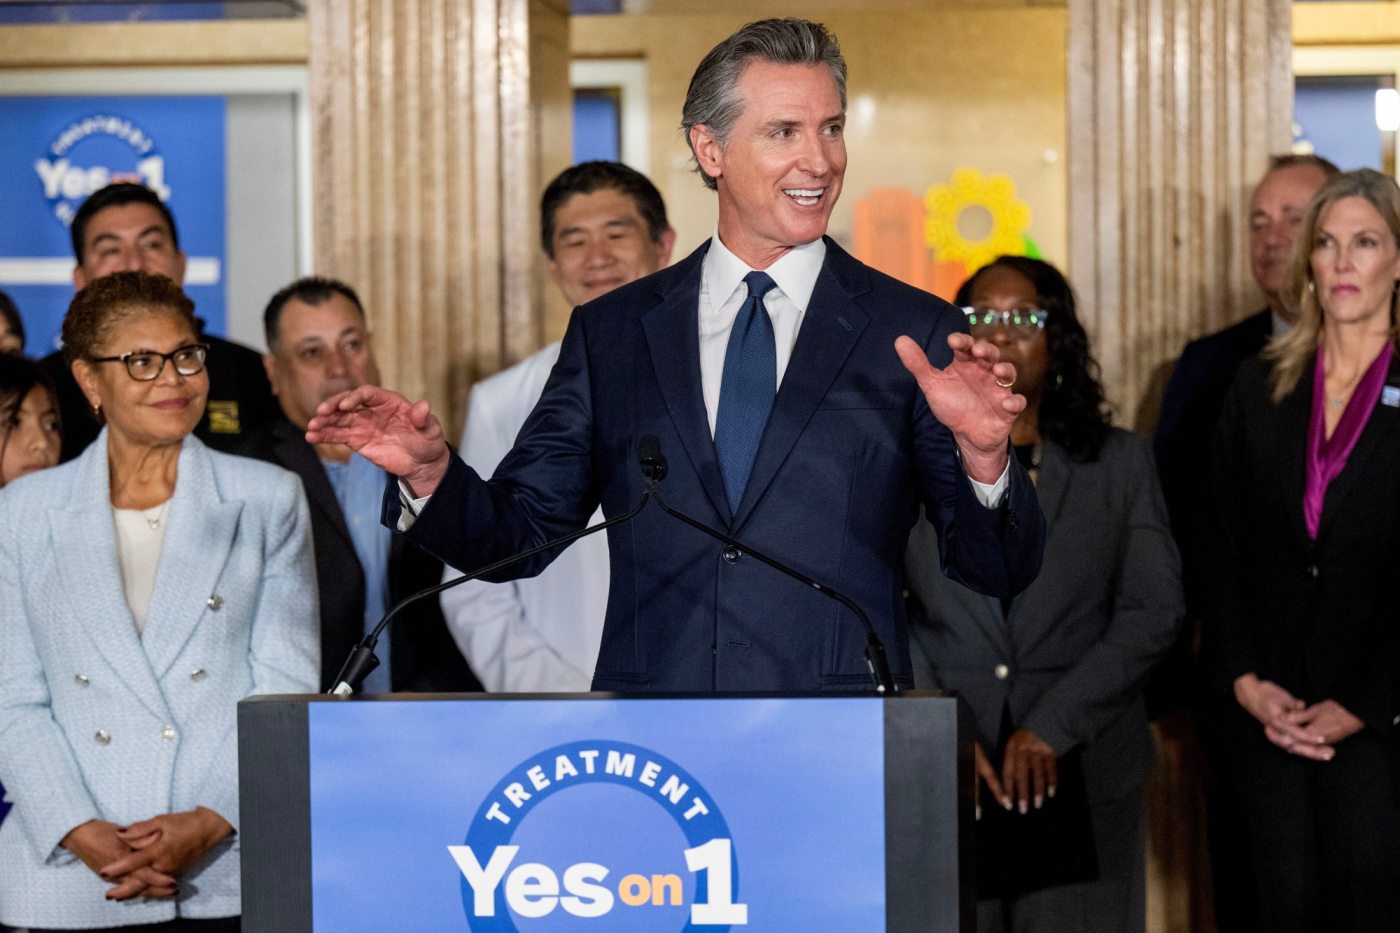 newsom-backs-bill-to-add-more-affordable-housing-for-california’s-poorest-residents